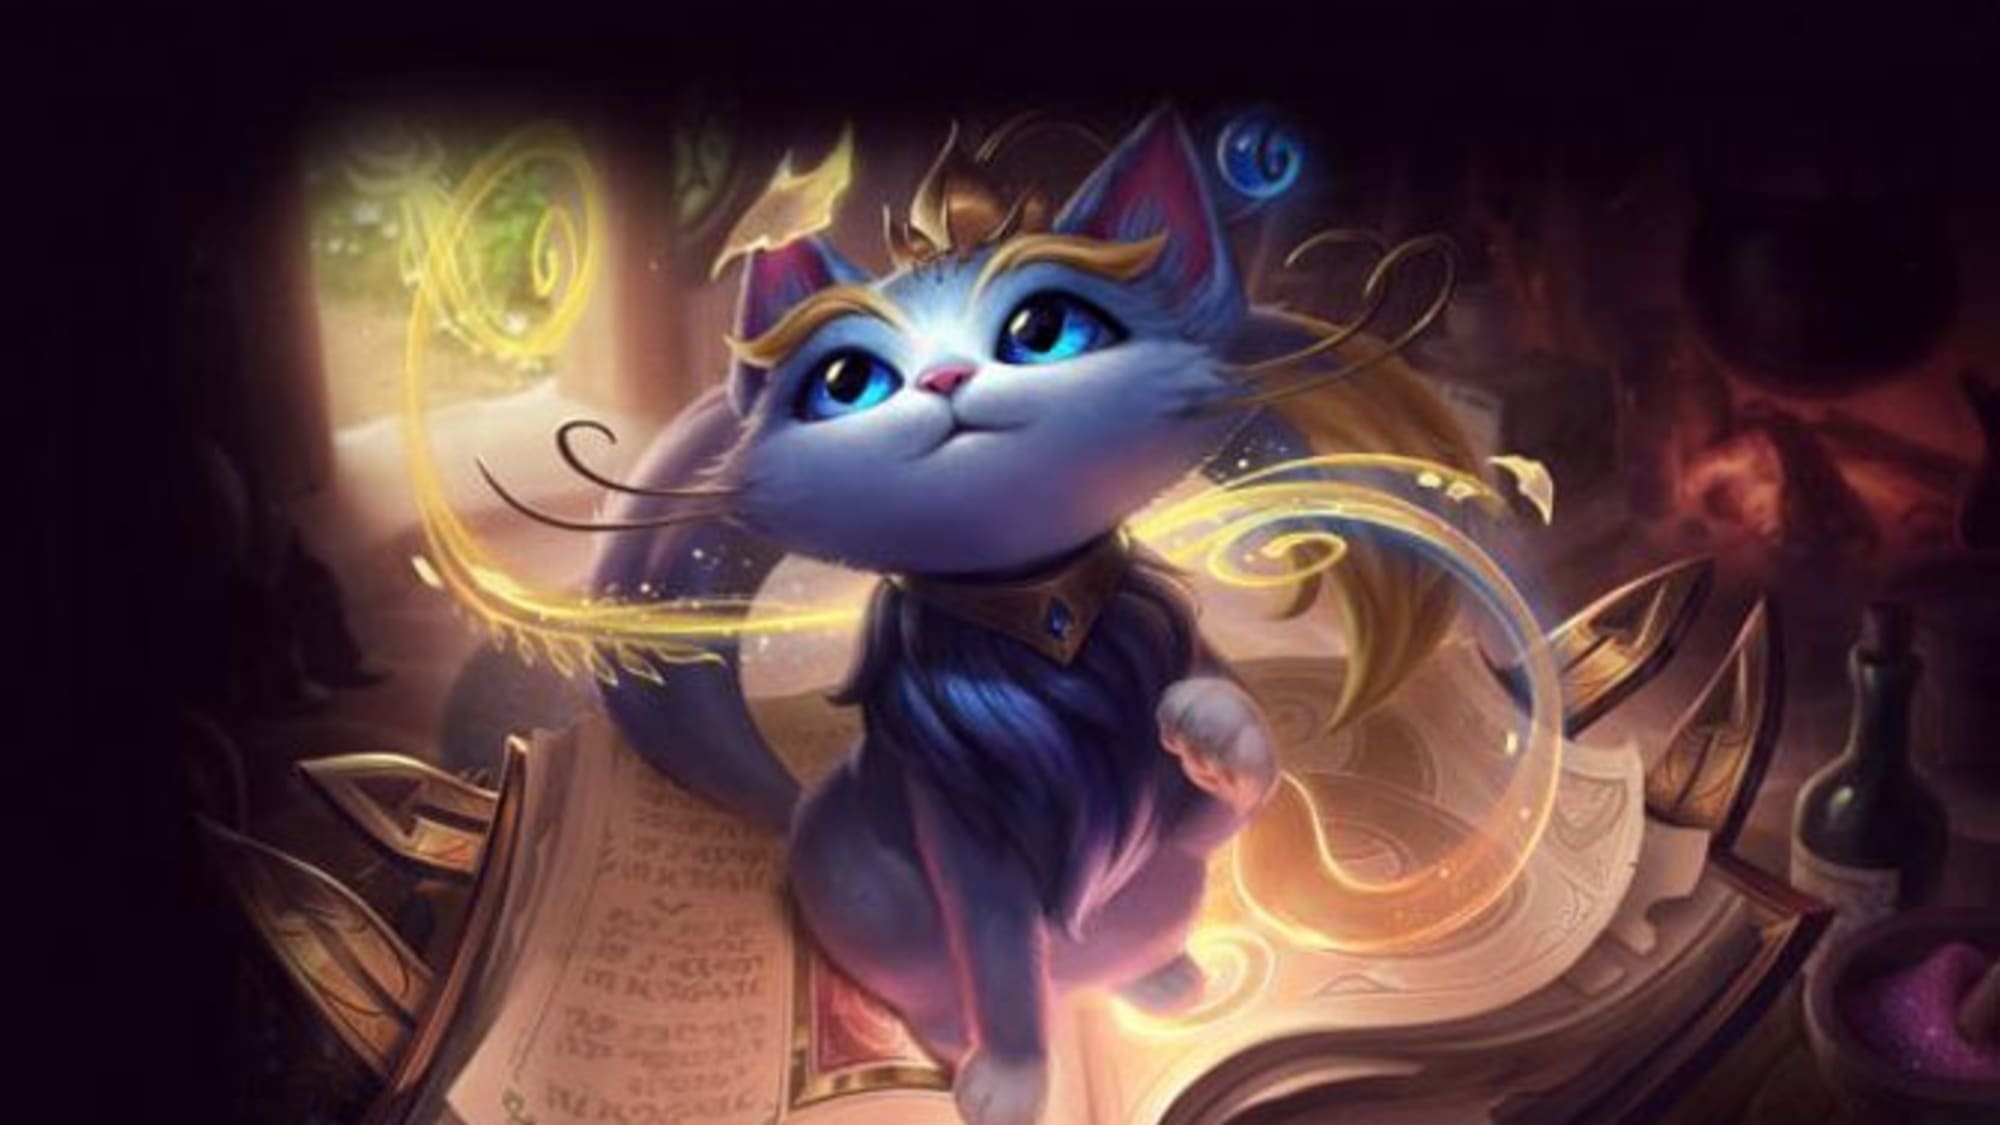 Riot Games reveals 'LoL' Roadmap plans to release six champions